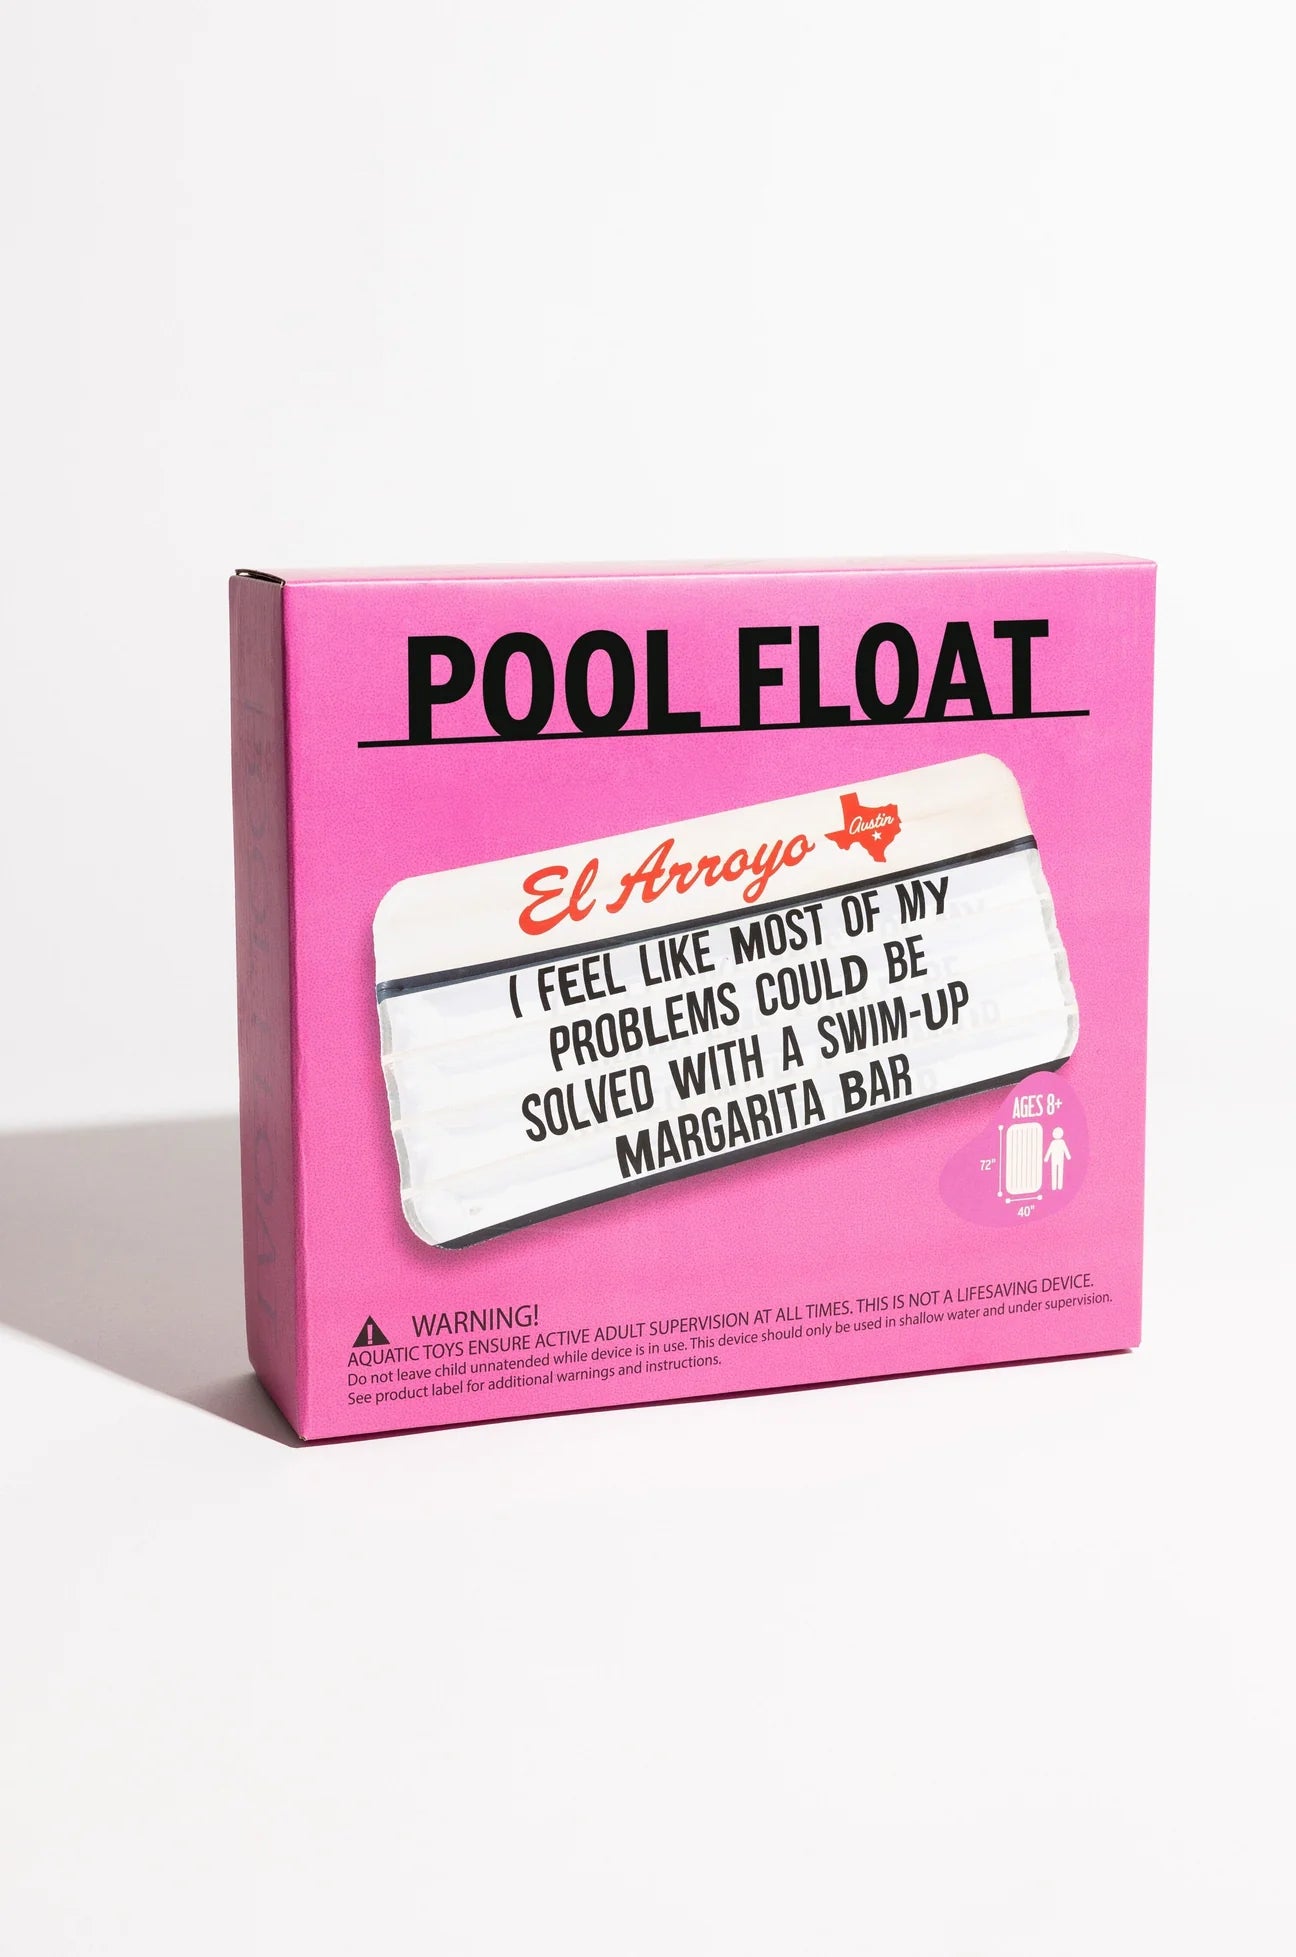 My Problems Pool Float